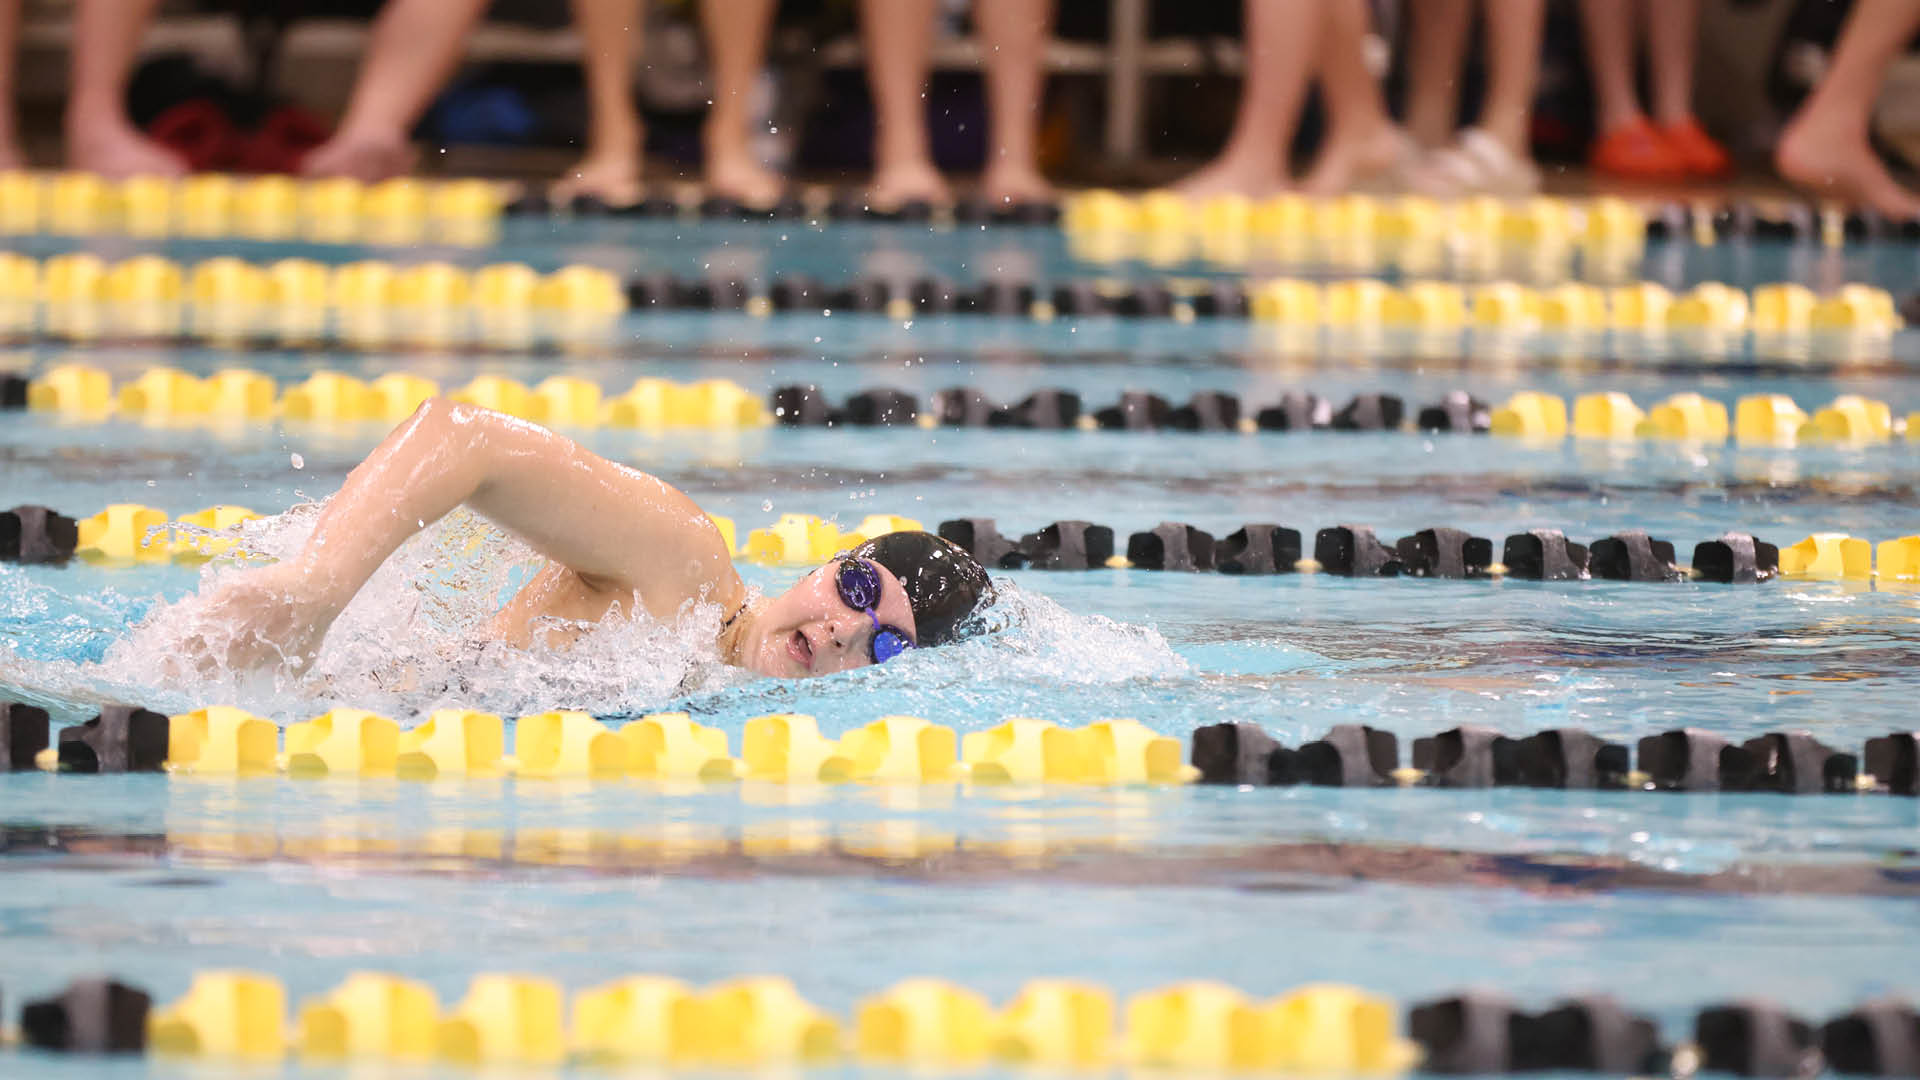 Showalter Sets School Record in 200 IM; Schiro and Smith Grab Top-8 Finishes